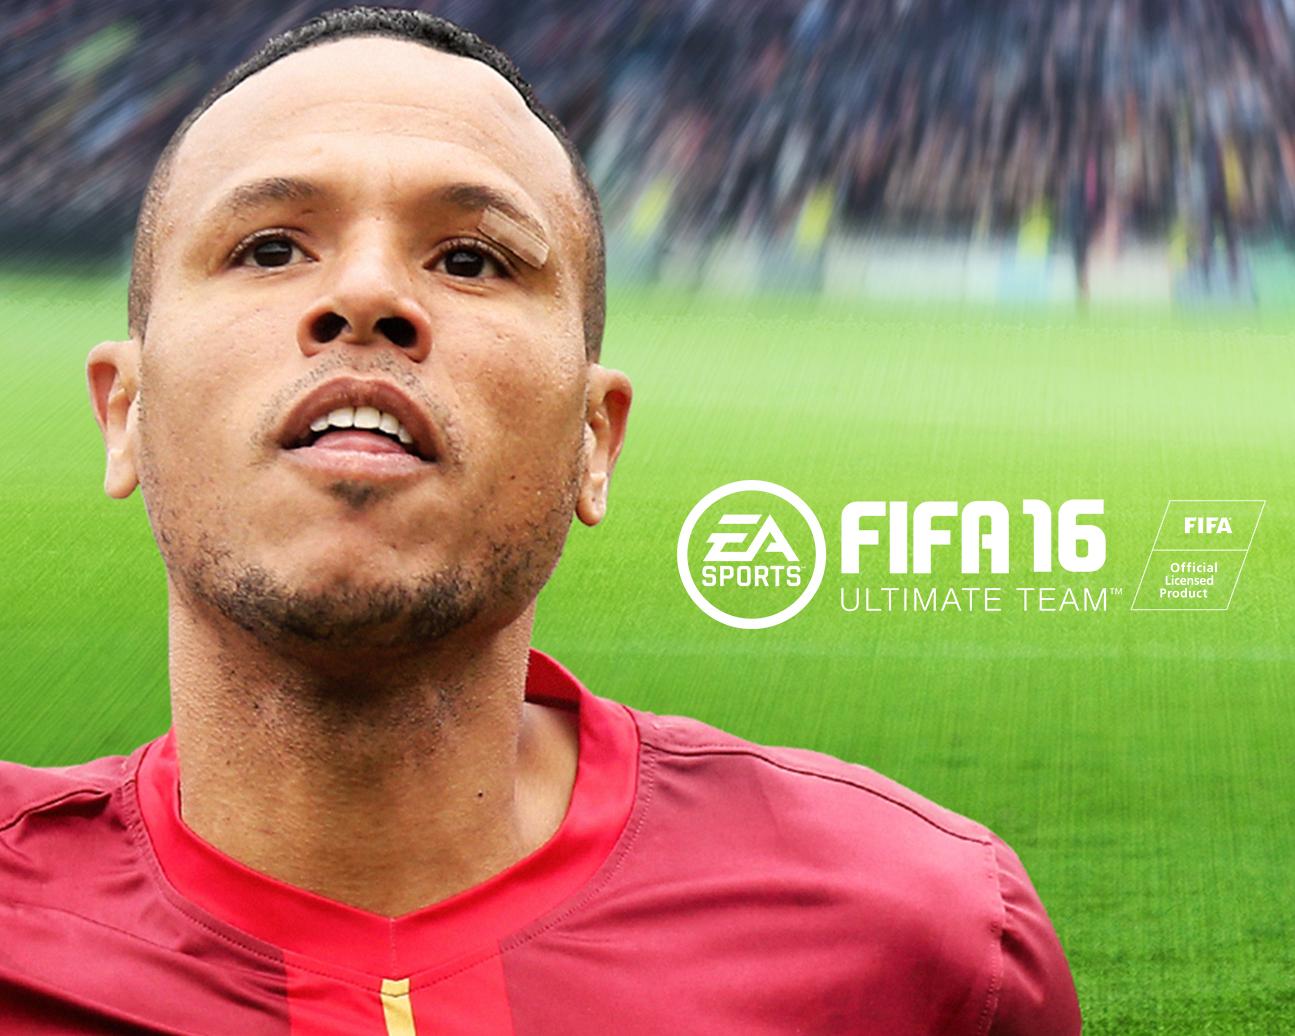 Player Luís Fabiano will participate in an event at the Apple Store, Morumbi this Wednesday